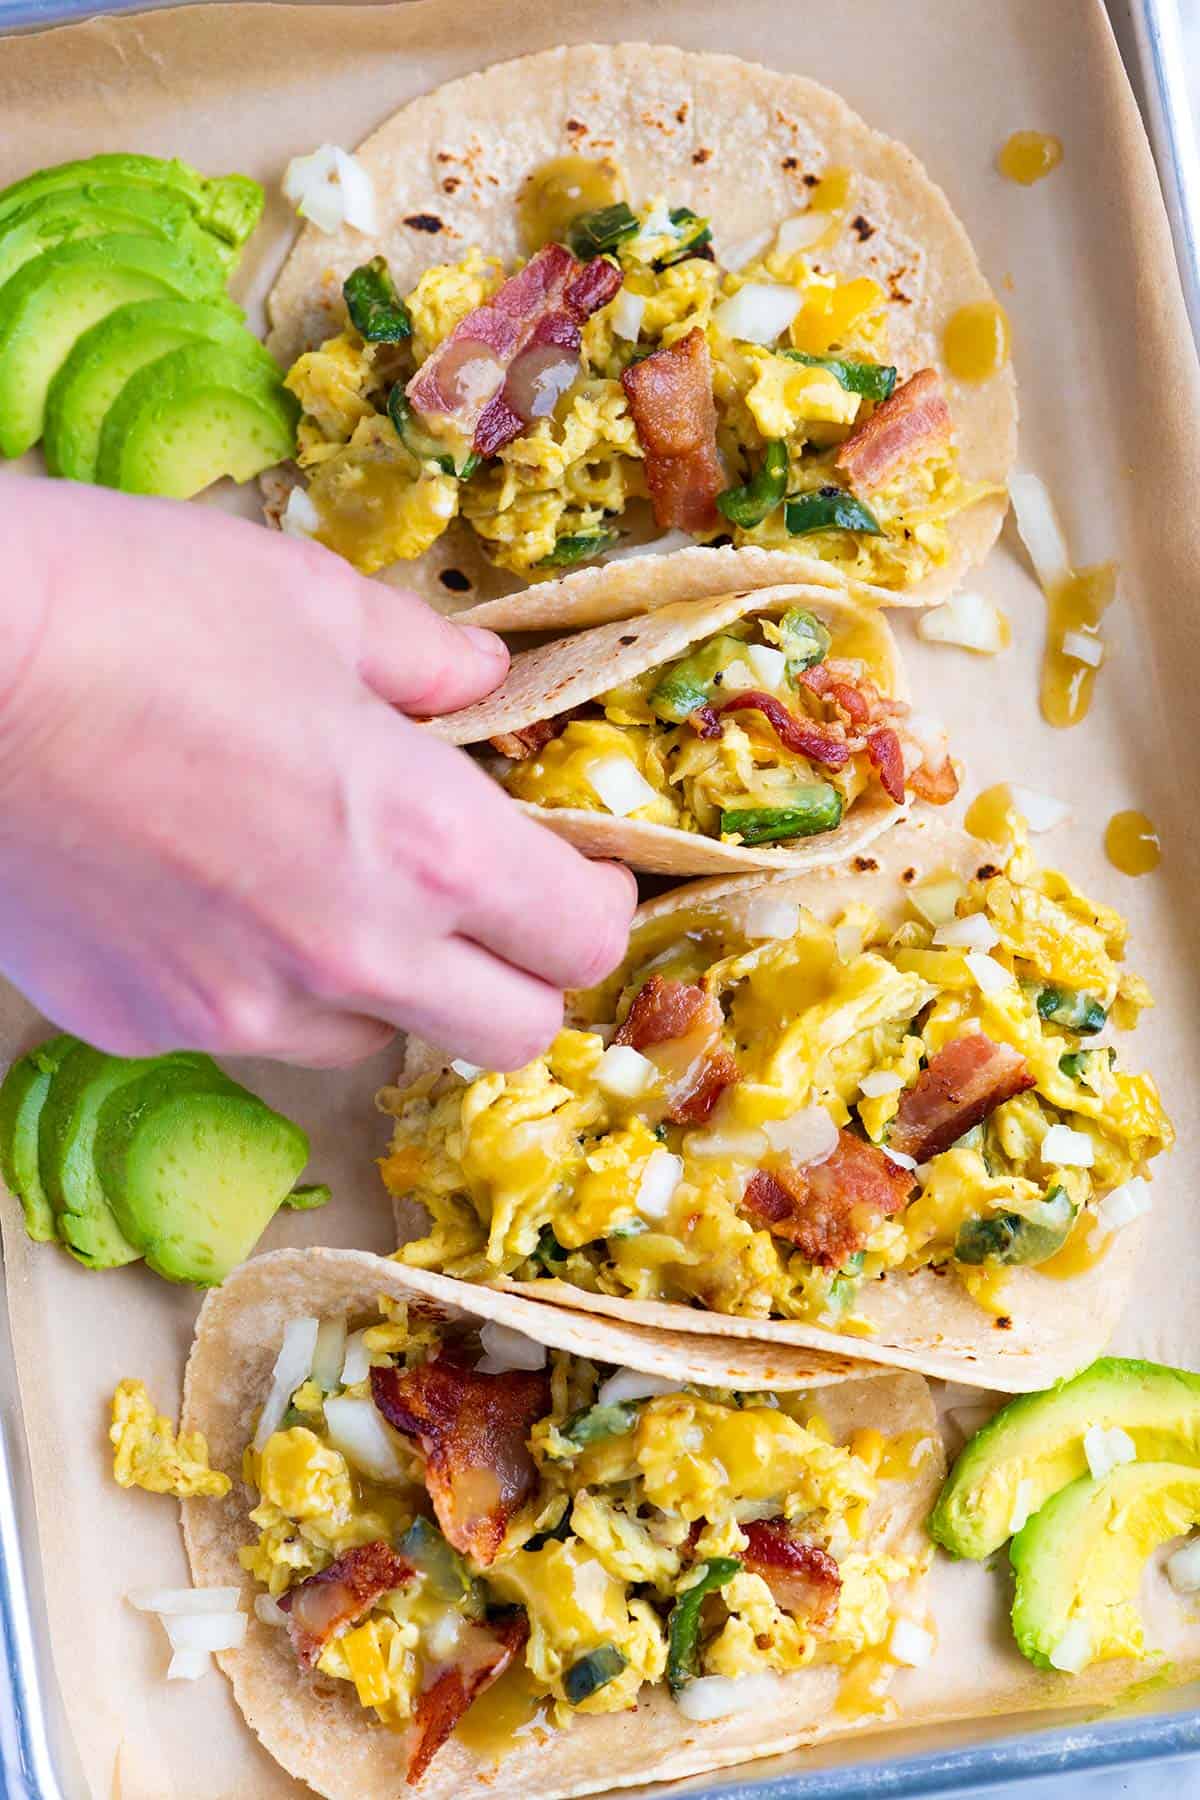 These easy breakfast tacos with shredded potatoes, peppers and onions are ultra-satisfying, quick and delicious. You have just found your new favorite breakfast.